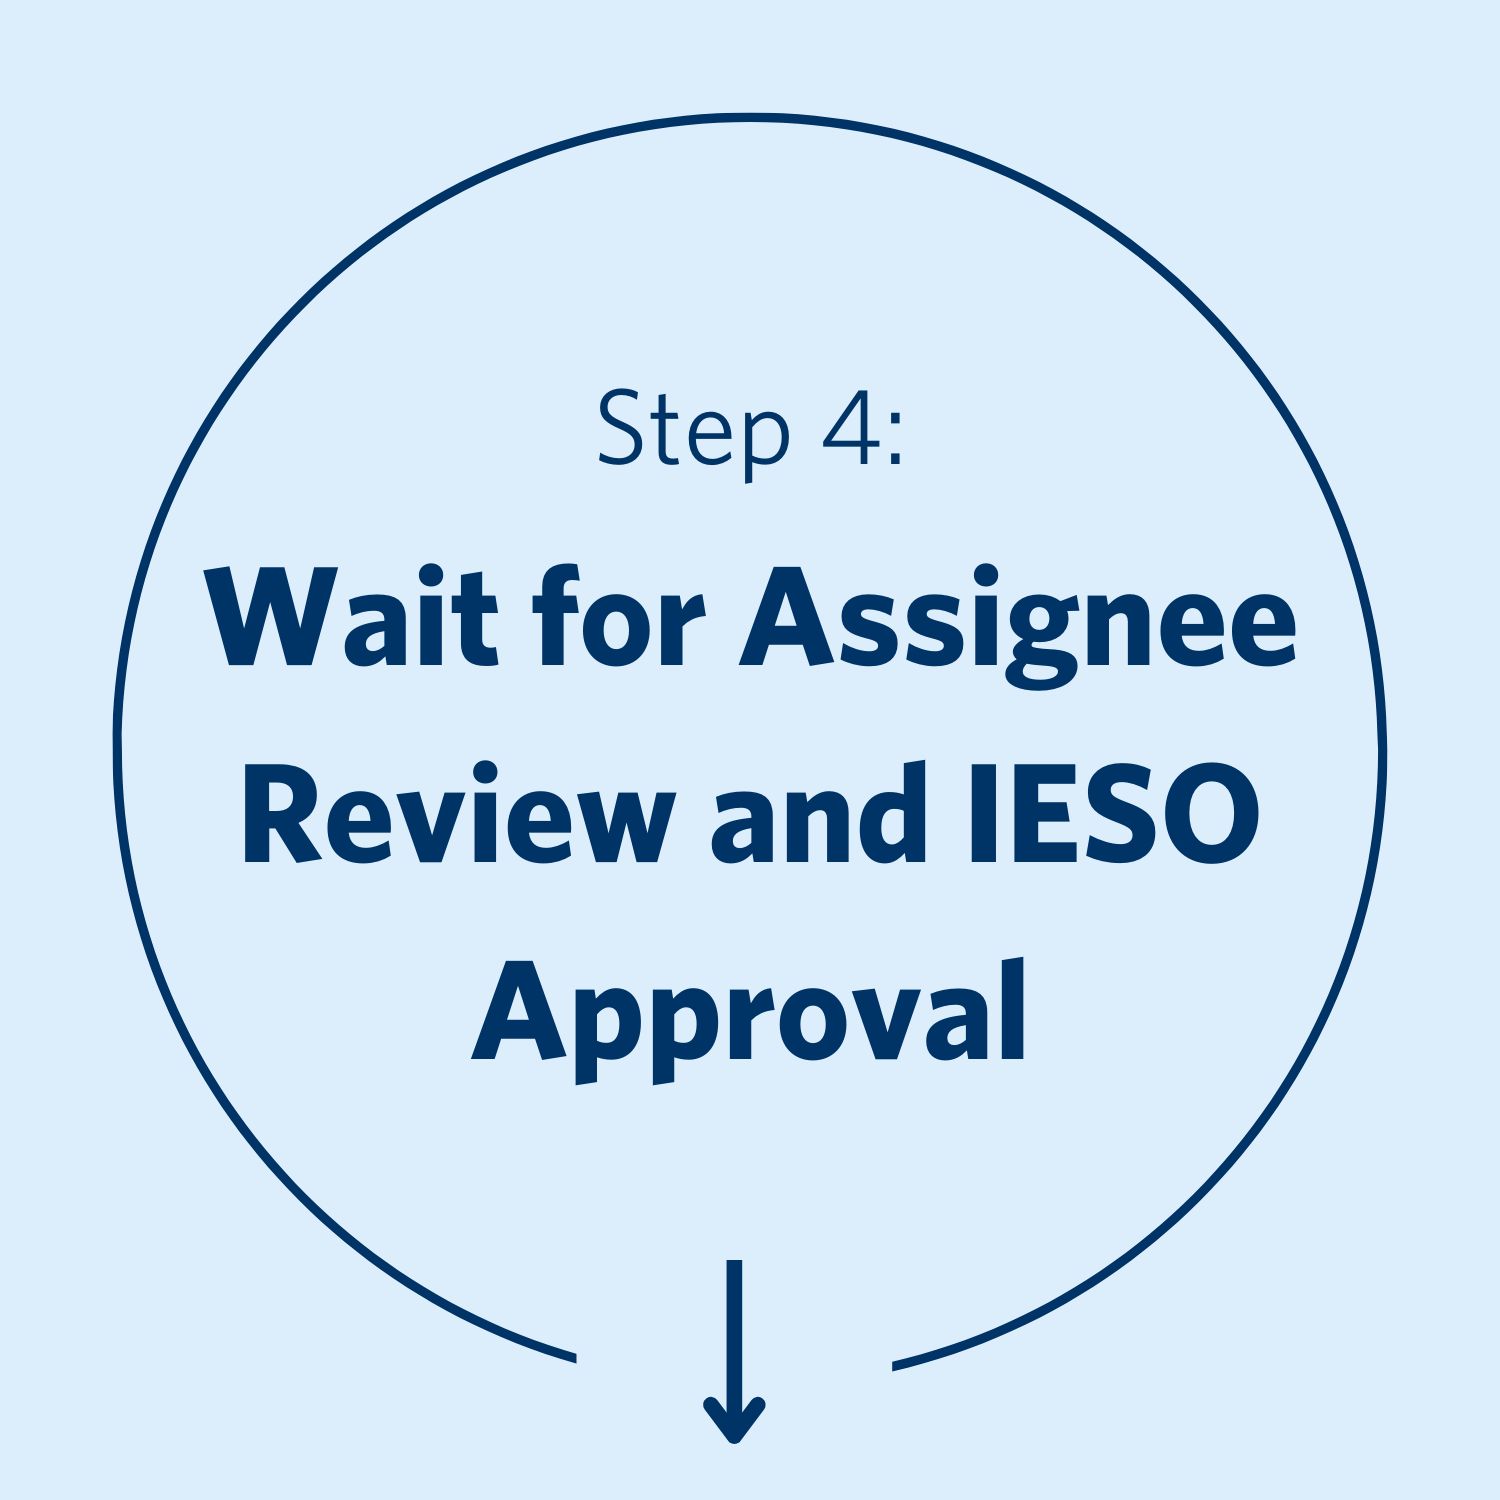 Step 4: Wait for Assignee Review and IESO Approval